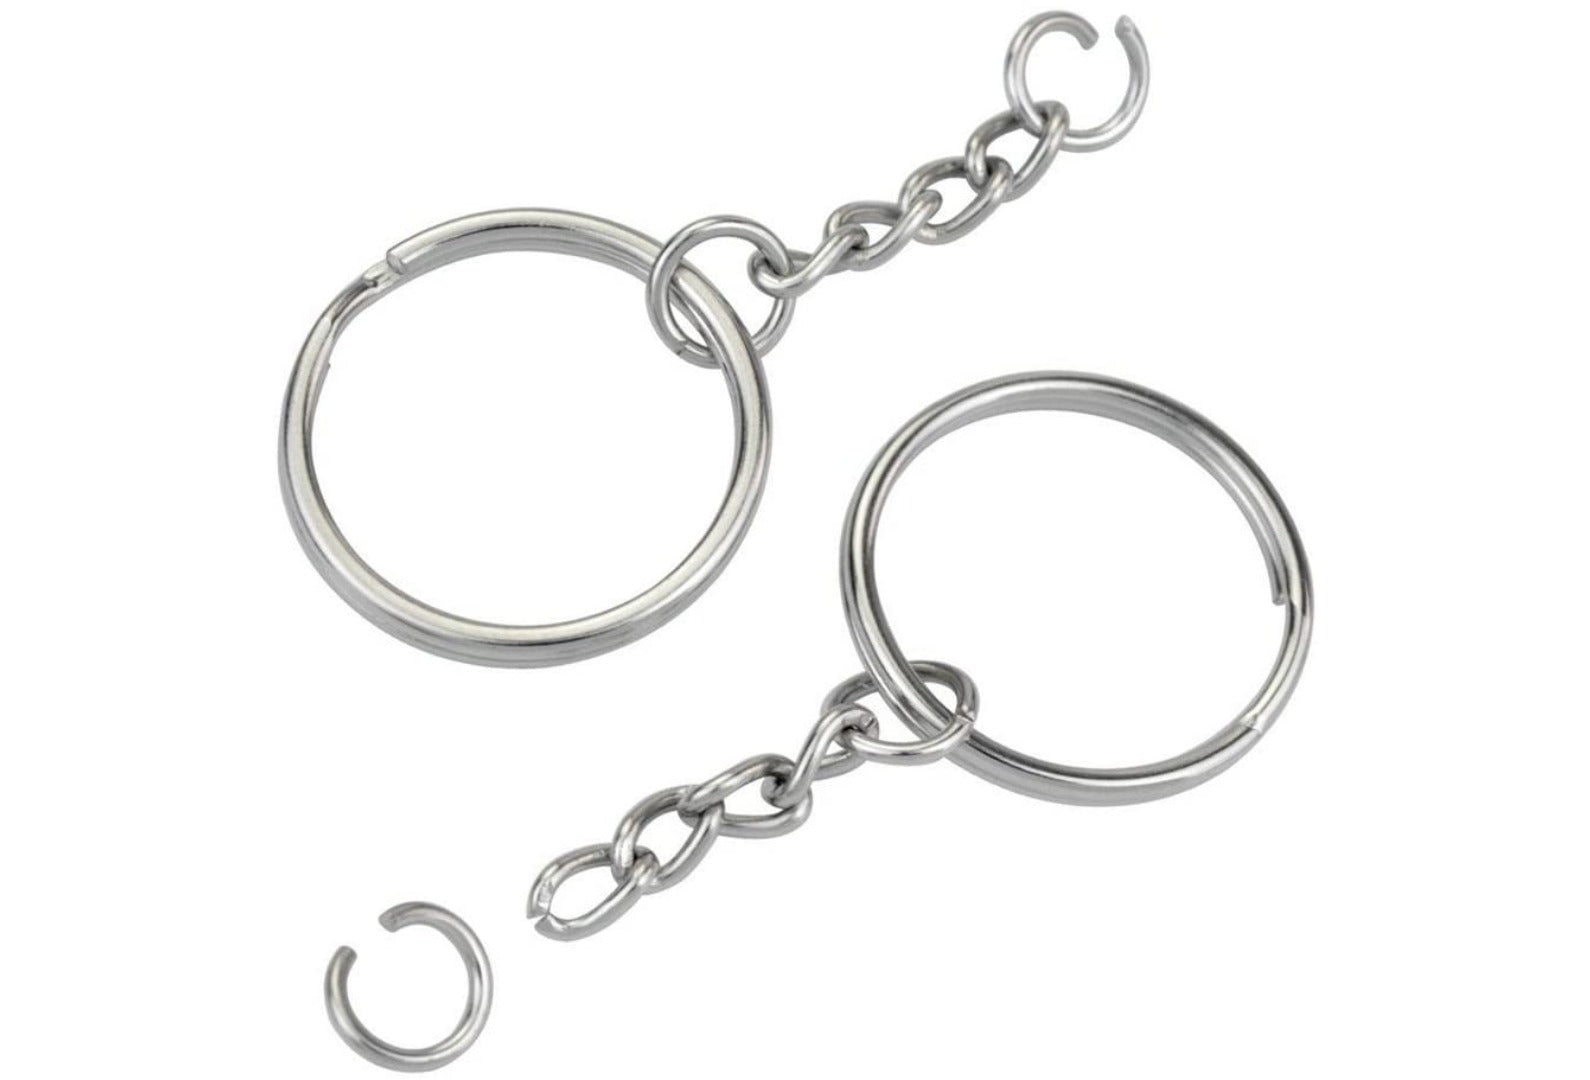 KINGFOREST 80PCS Split Key Ring with Chain 1 inch and Jump Rings